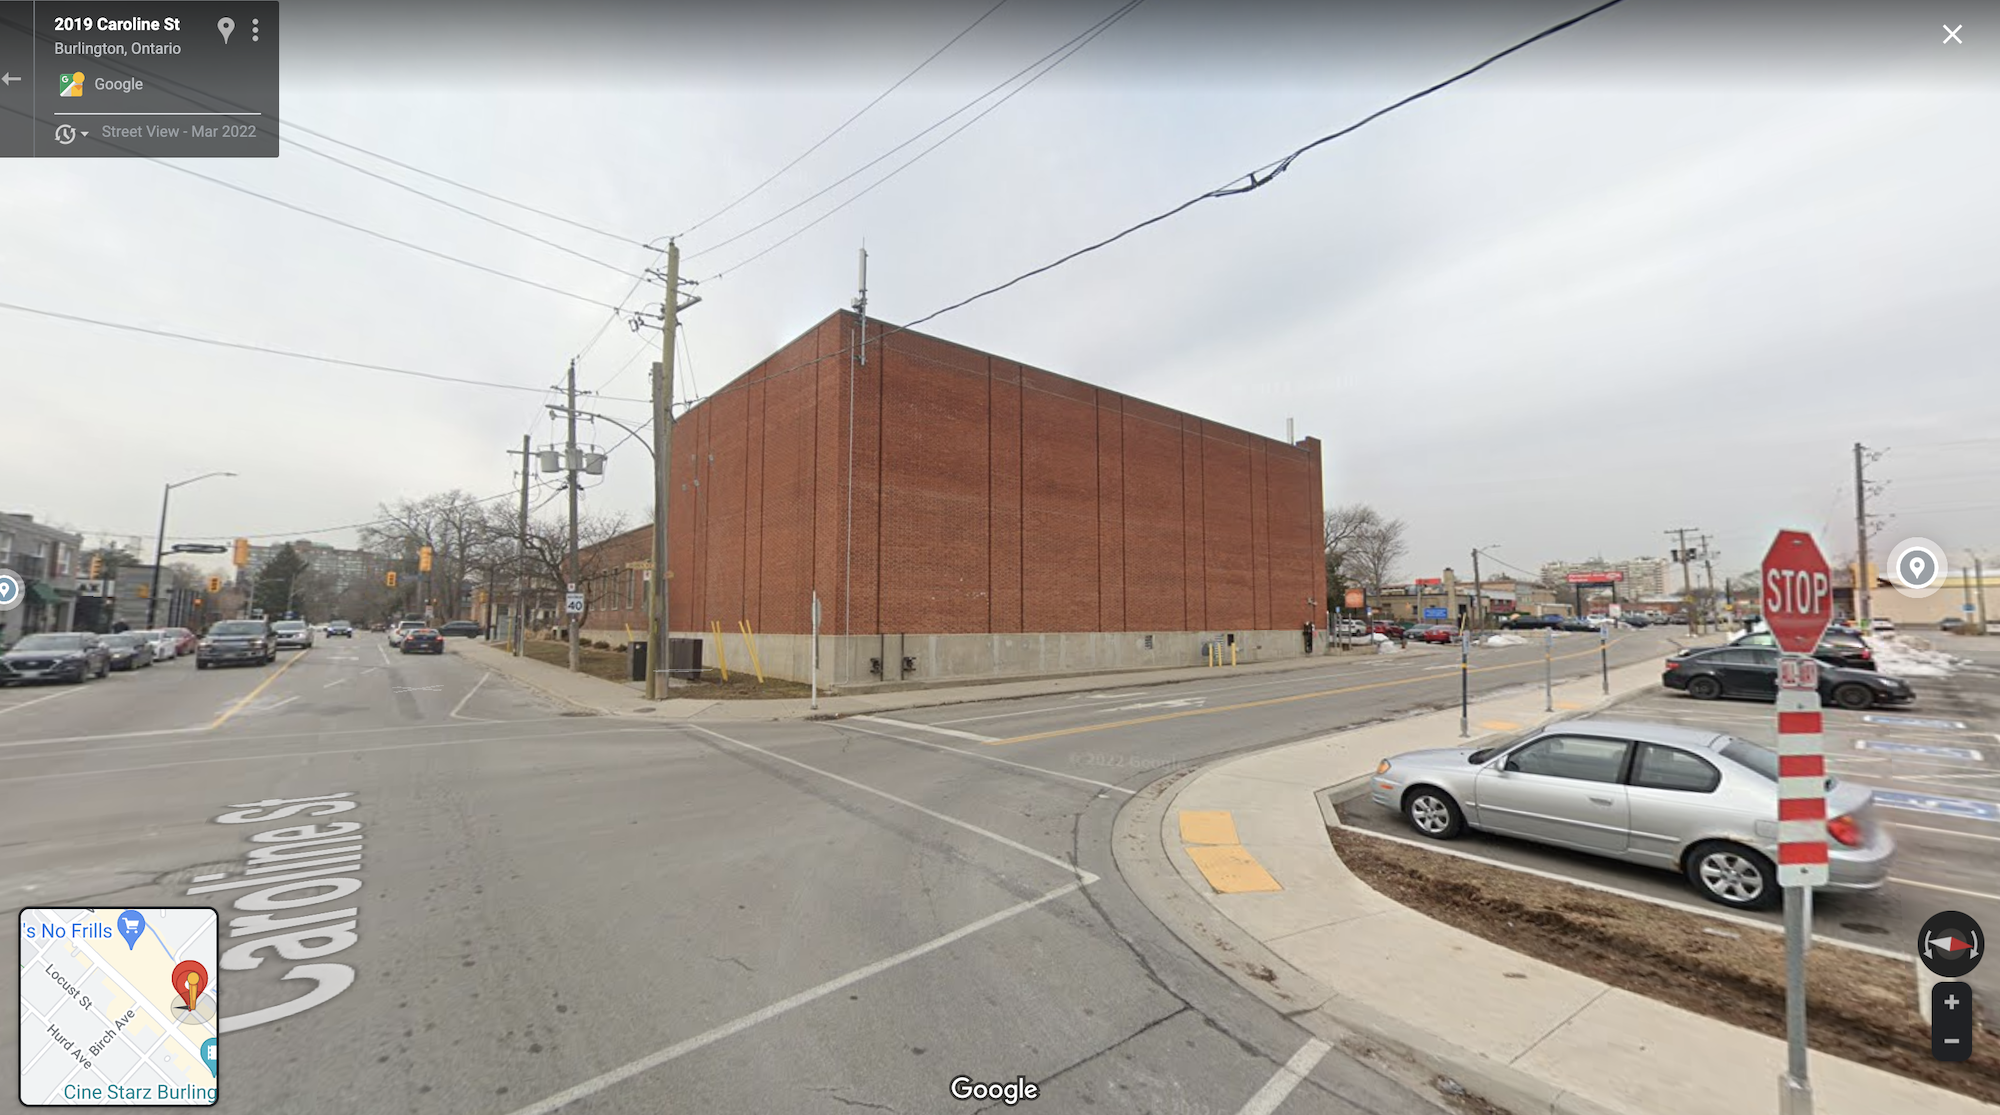 Google street view of a large brick building in Burlington, Ontario at the corner of an stop-sign intersection